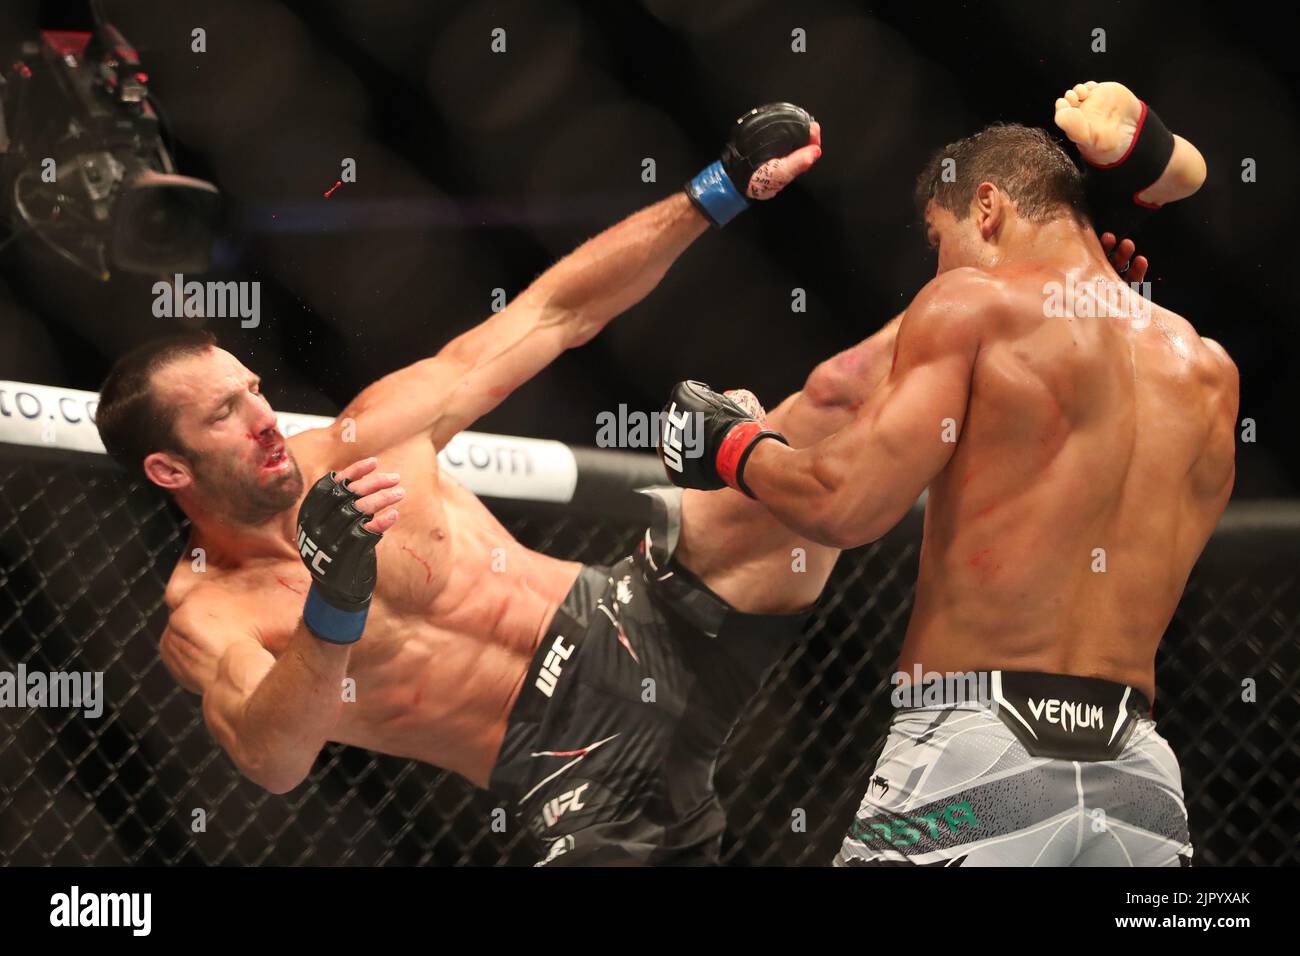 Salt Lake City, United States. 20th Aug, 2022. SALT LAKE CITY, UT - AUGUST 20: (L-R) Luke Rockhold kicks Paulo Costa in their Middleweight bout during the UFC 278 at the Vivint Arena on August 20, 2022 in Salt Lake City, Utah, United States. (Photo by Alejandro Salazar/PxImages) Credit: Px Images/Alamy Live News Stock Photo